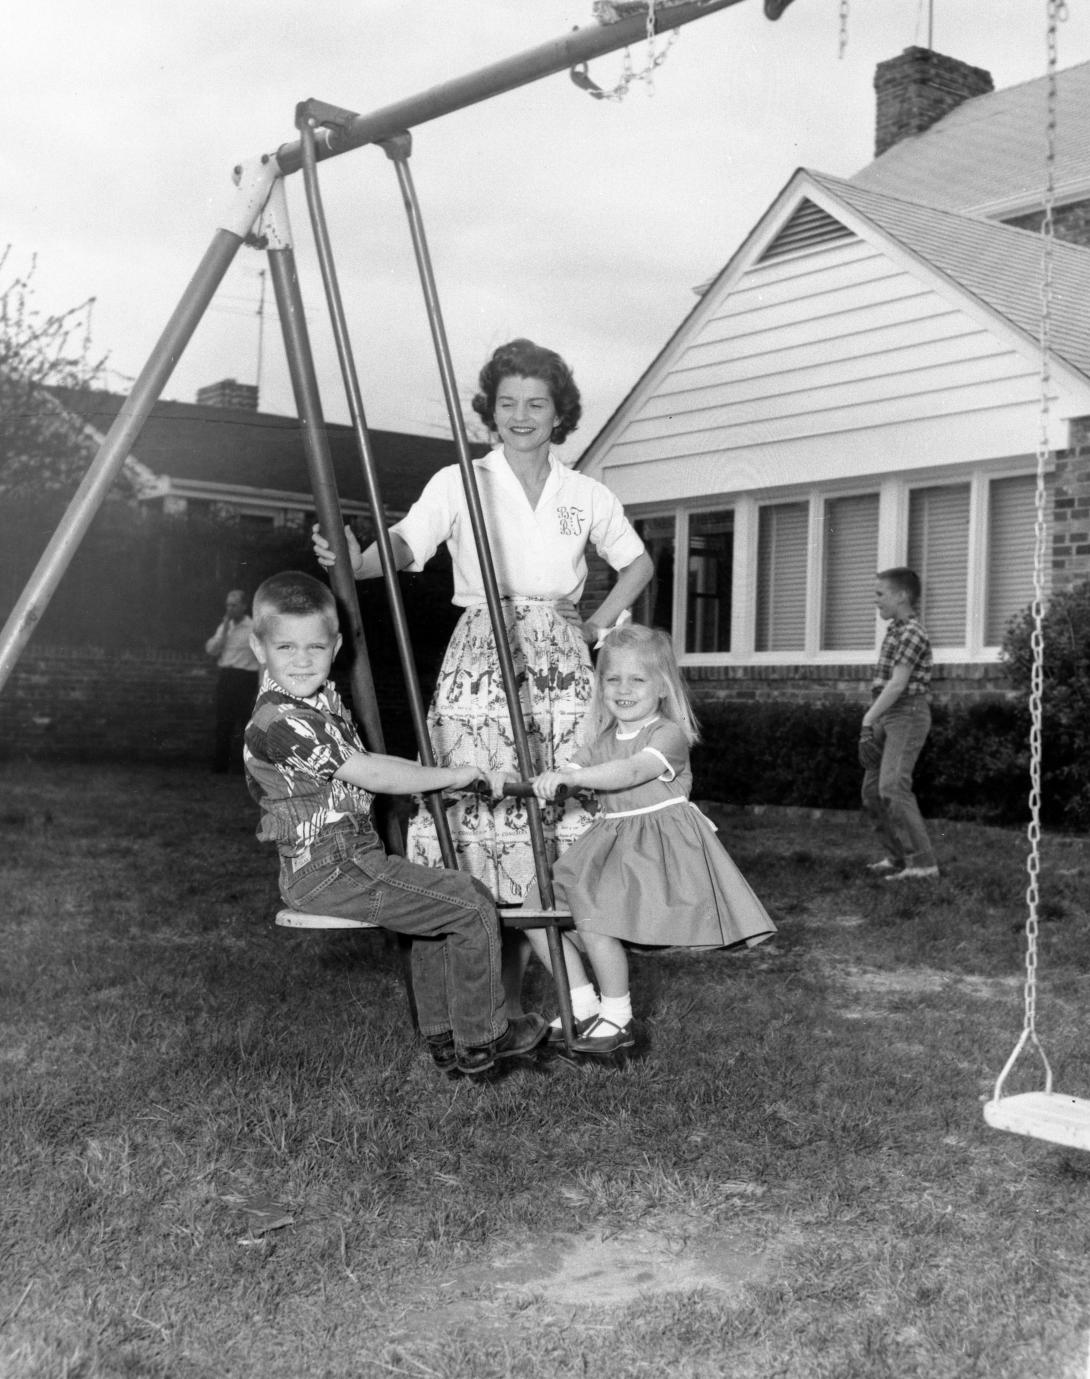 H0009-3. Betty watches as her children Steve and Susan ride on a glider in the back yard of their home at 514 Crown View Drive, Alexandria, Virginia. Her son Michael appears in the background. 1962.